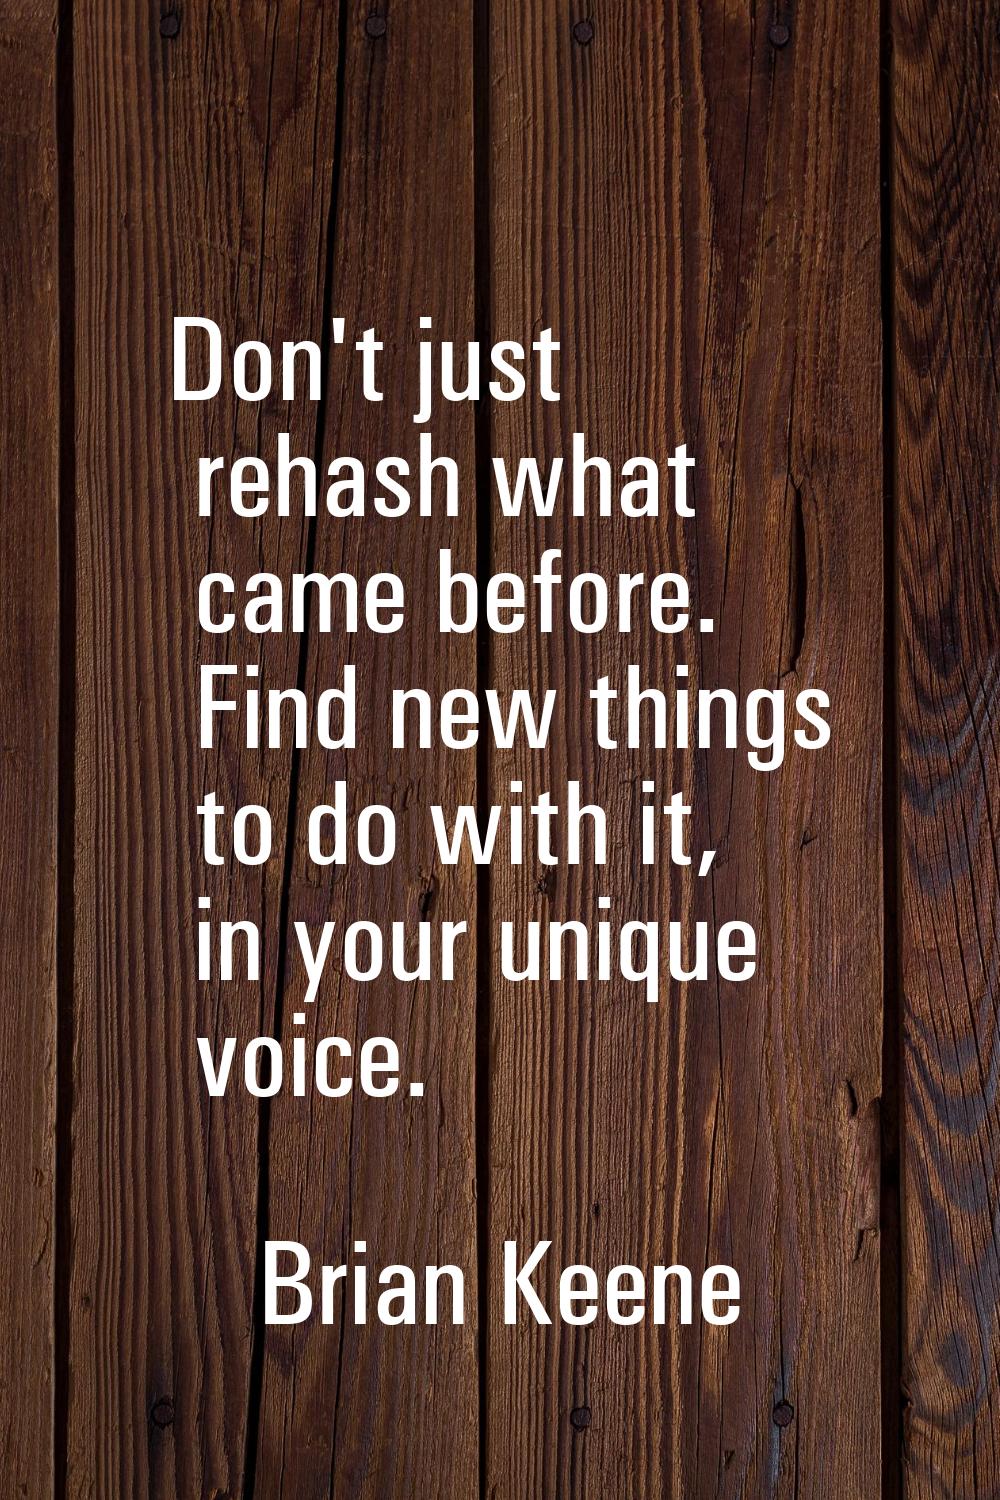 Don't just rehash what came before. Find new things to do with it, in your unique voice.